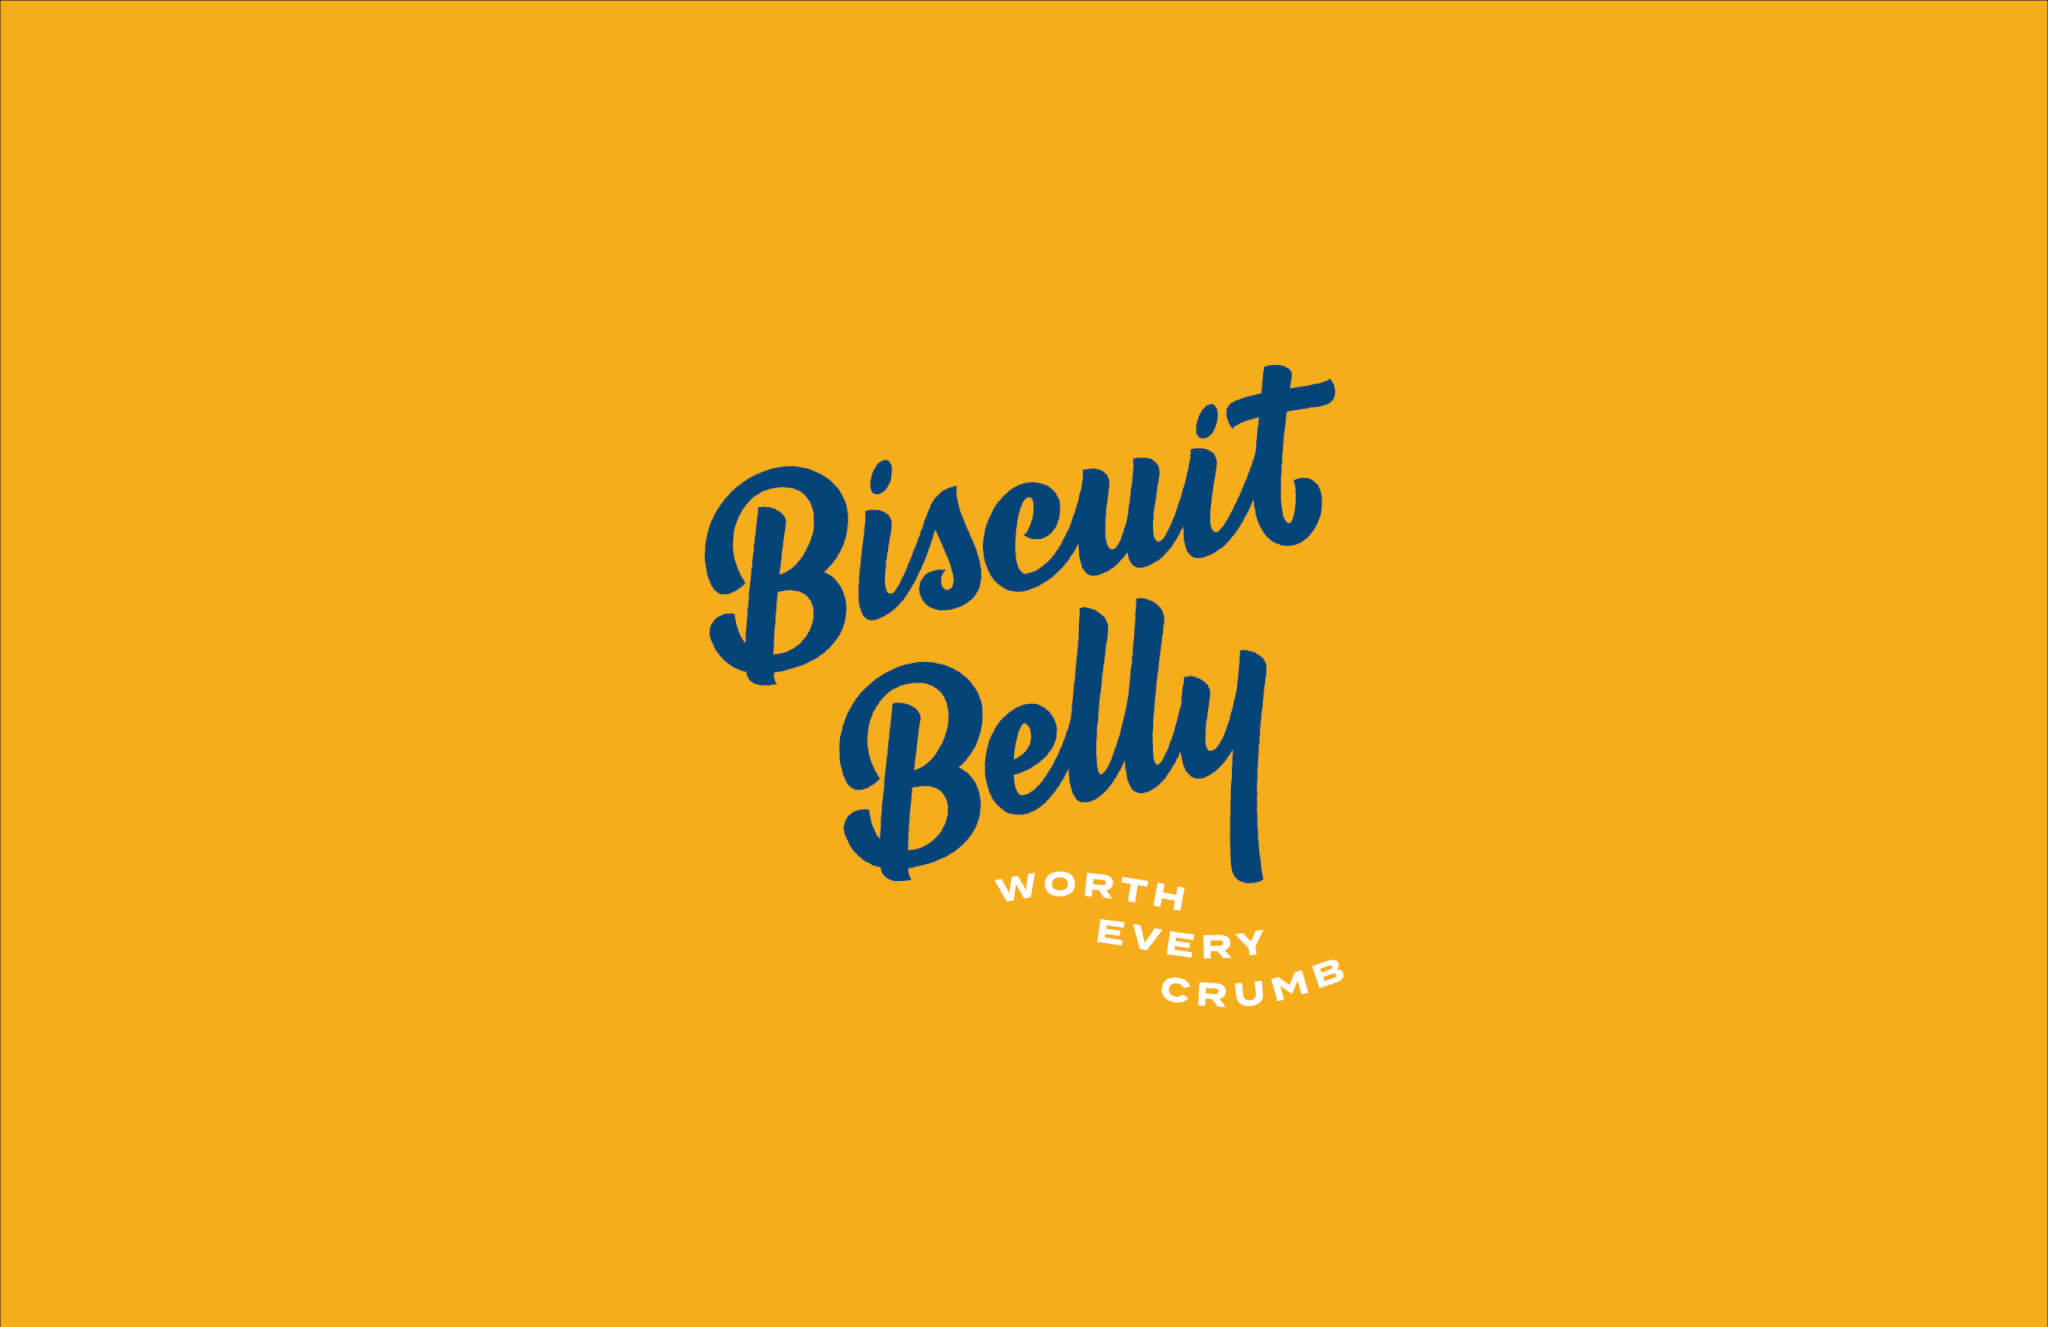 Biscuit Belly logo on yellow background